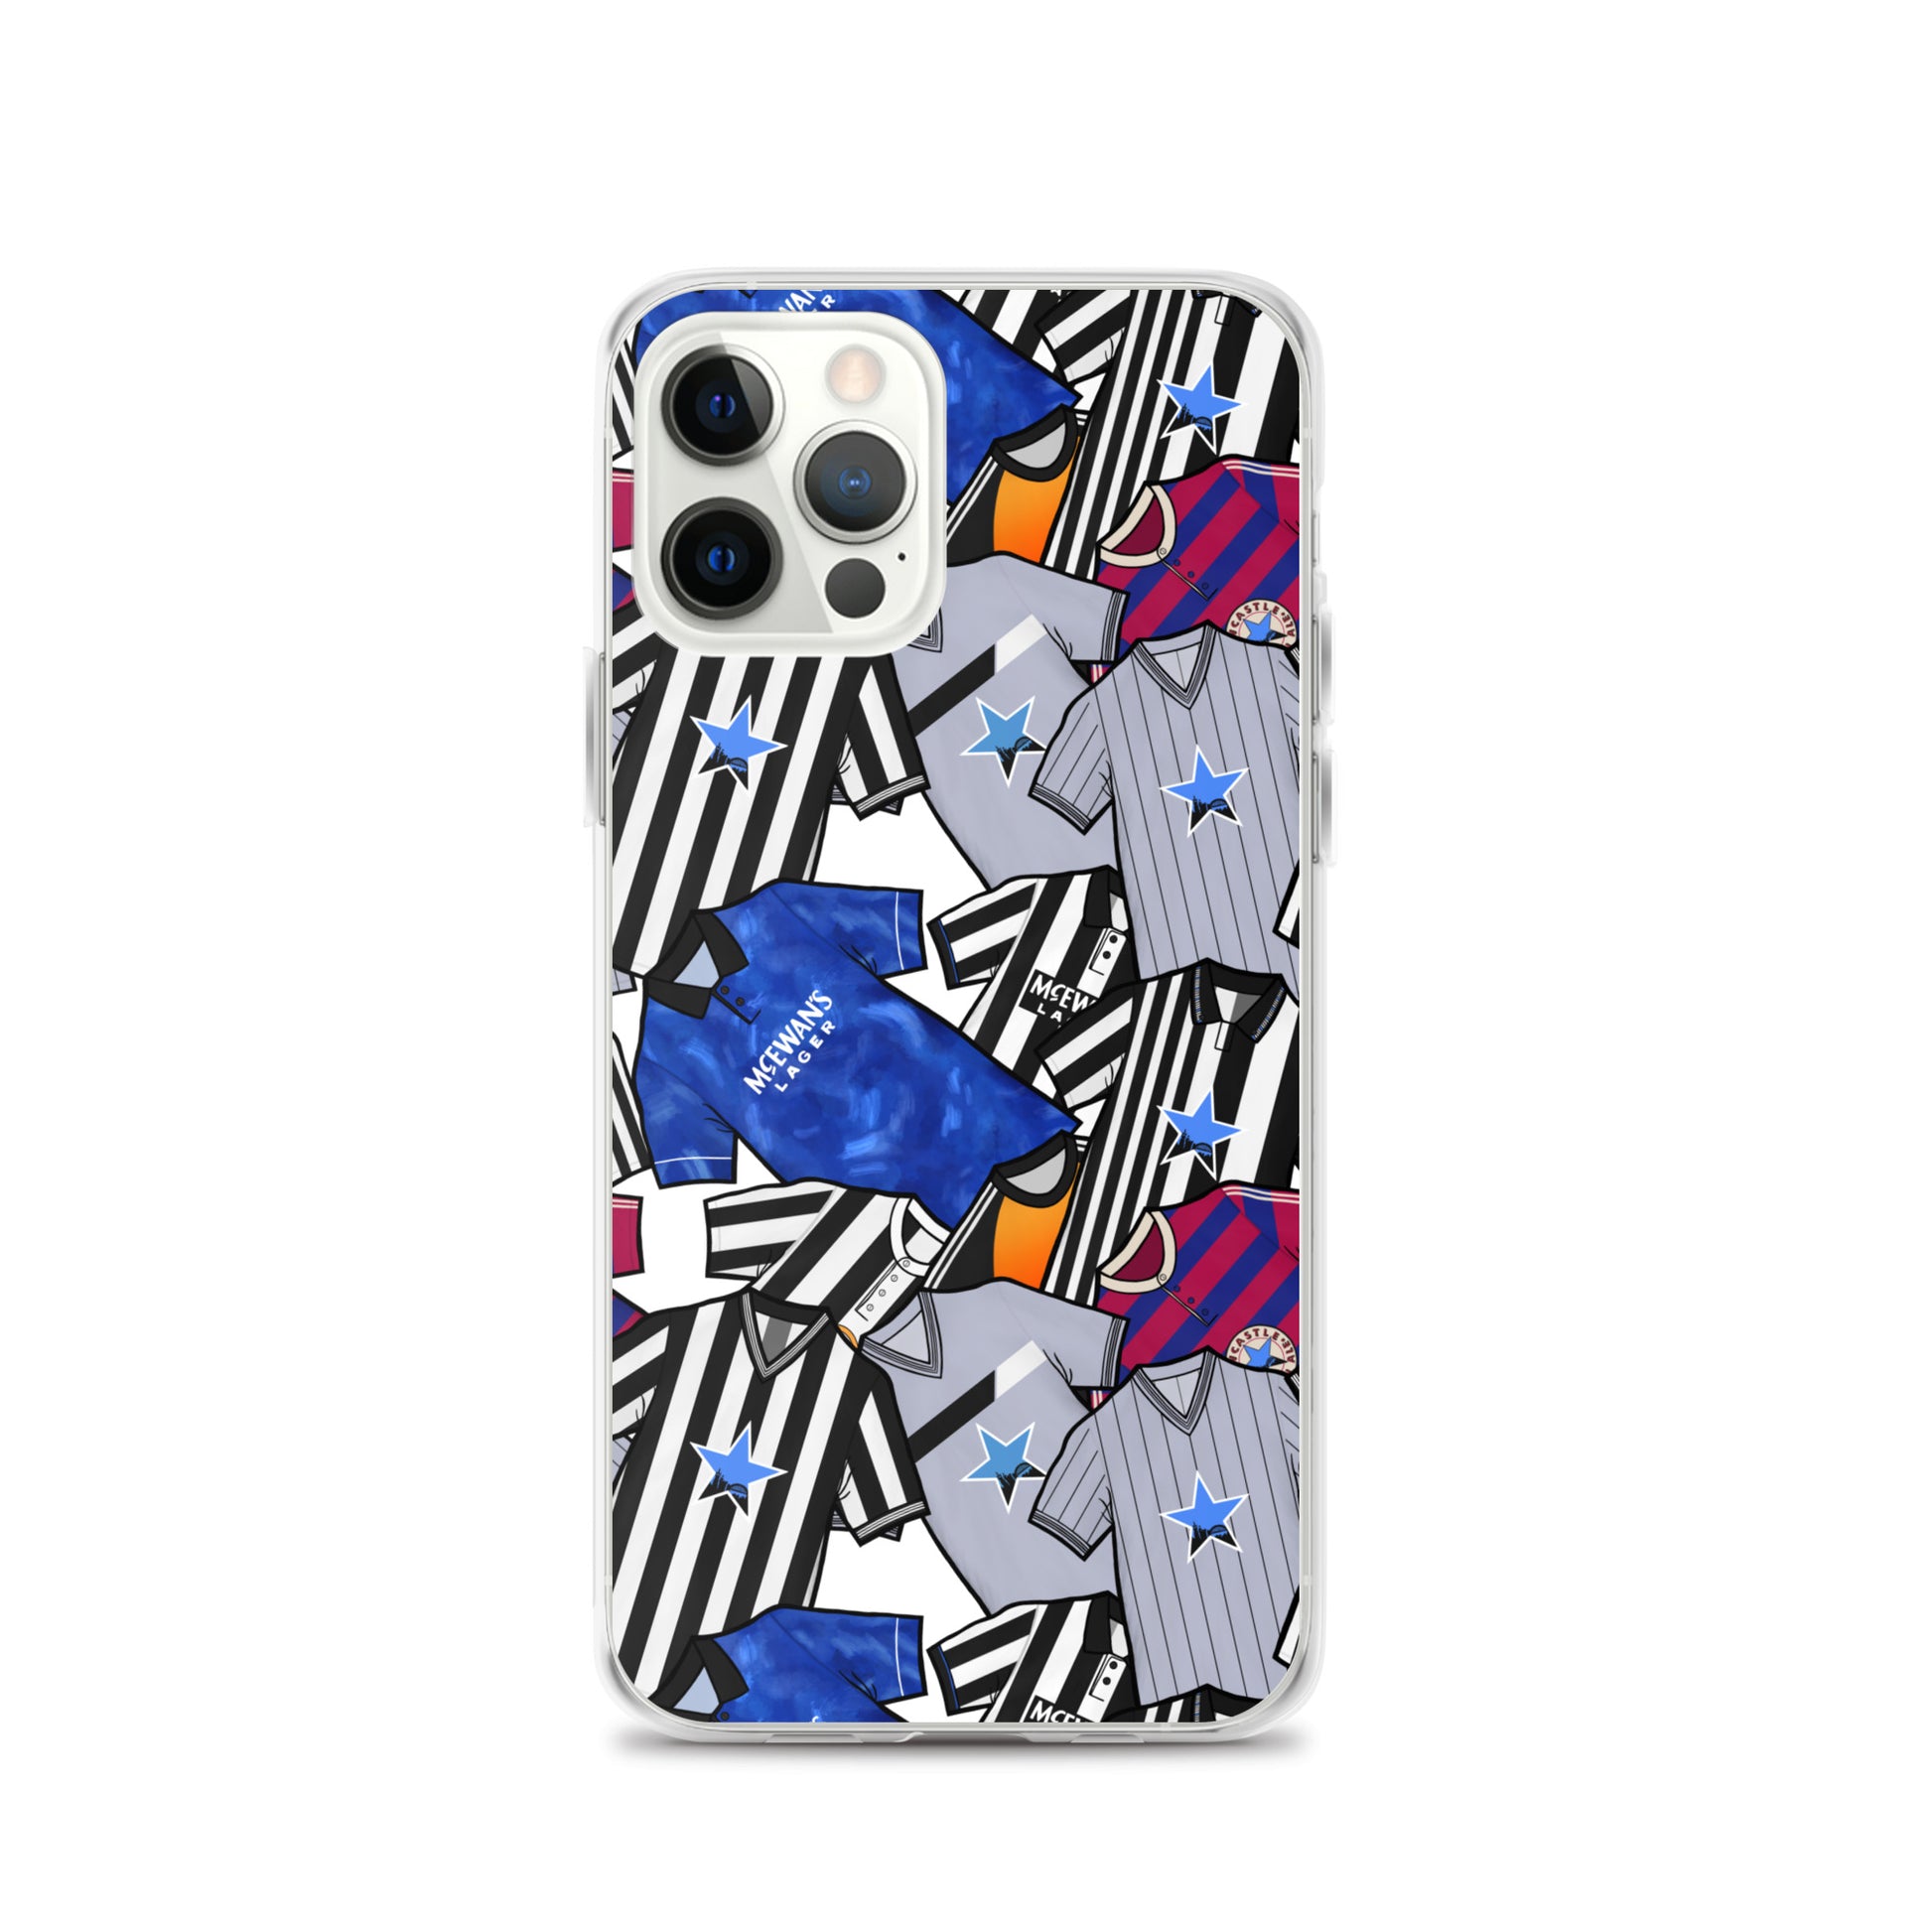 Phone case for iPhone 12 Pro inspired by the Retro shirts of Newcastle United!